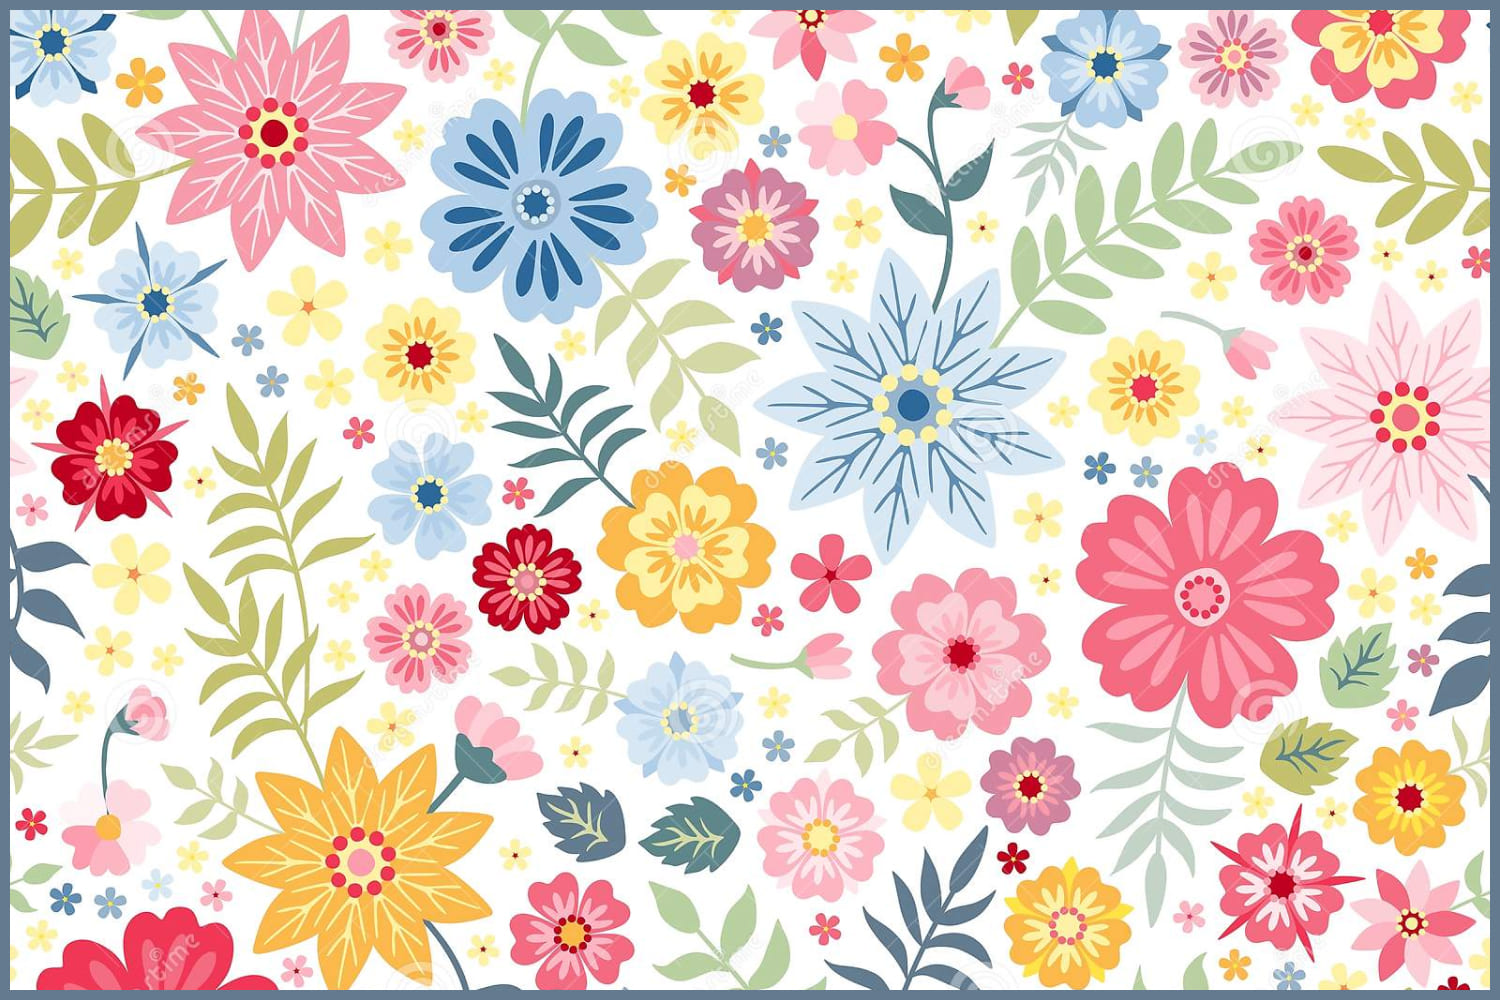 Multicolored drawn flowers of different shapes on a white background.